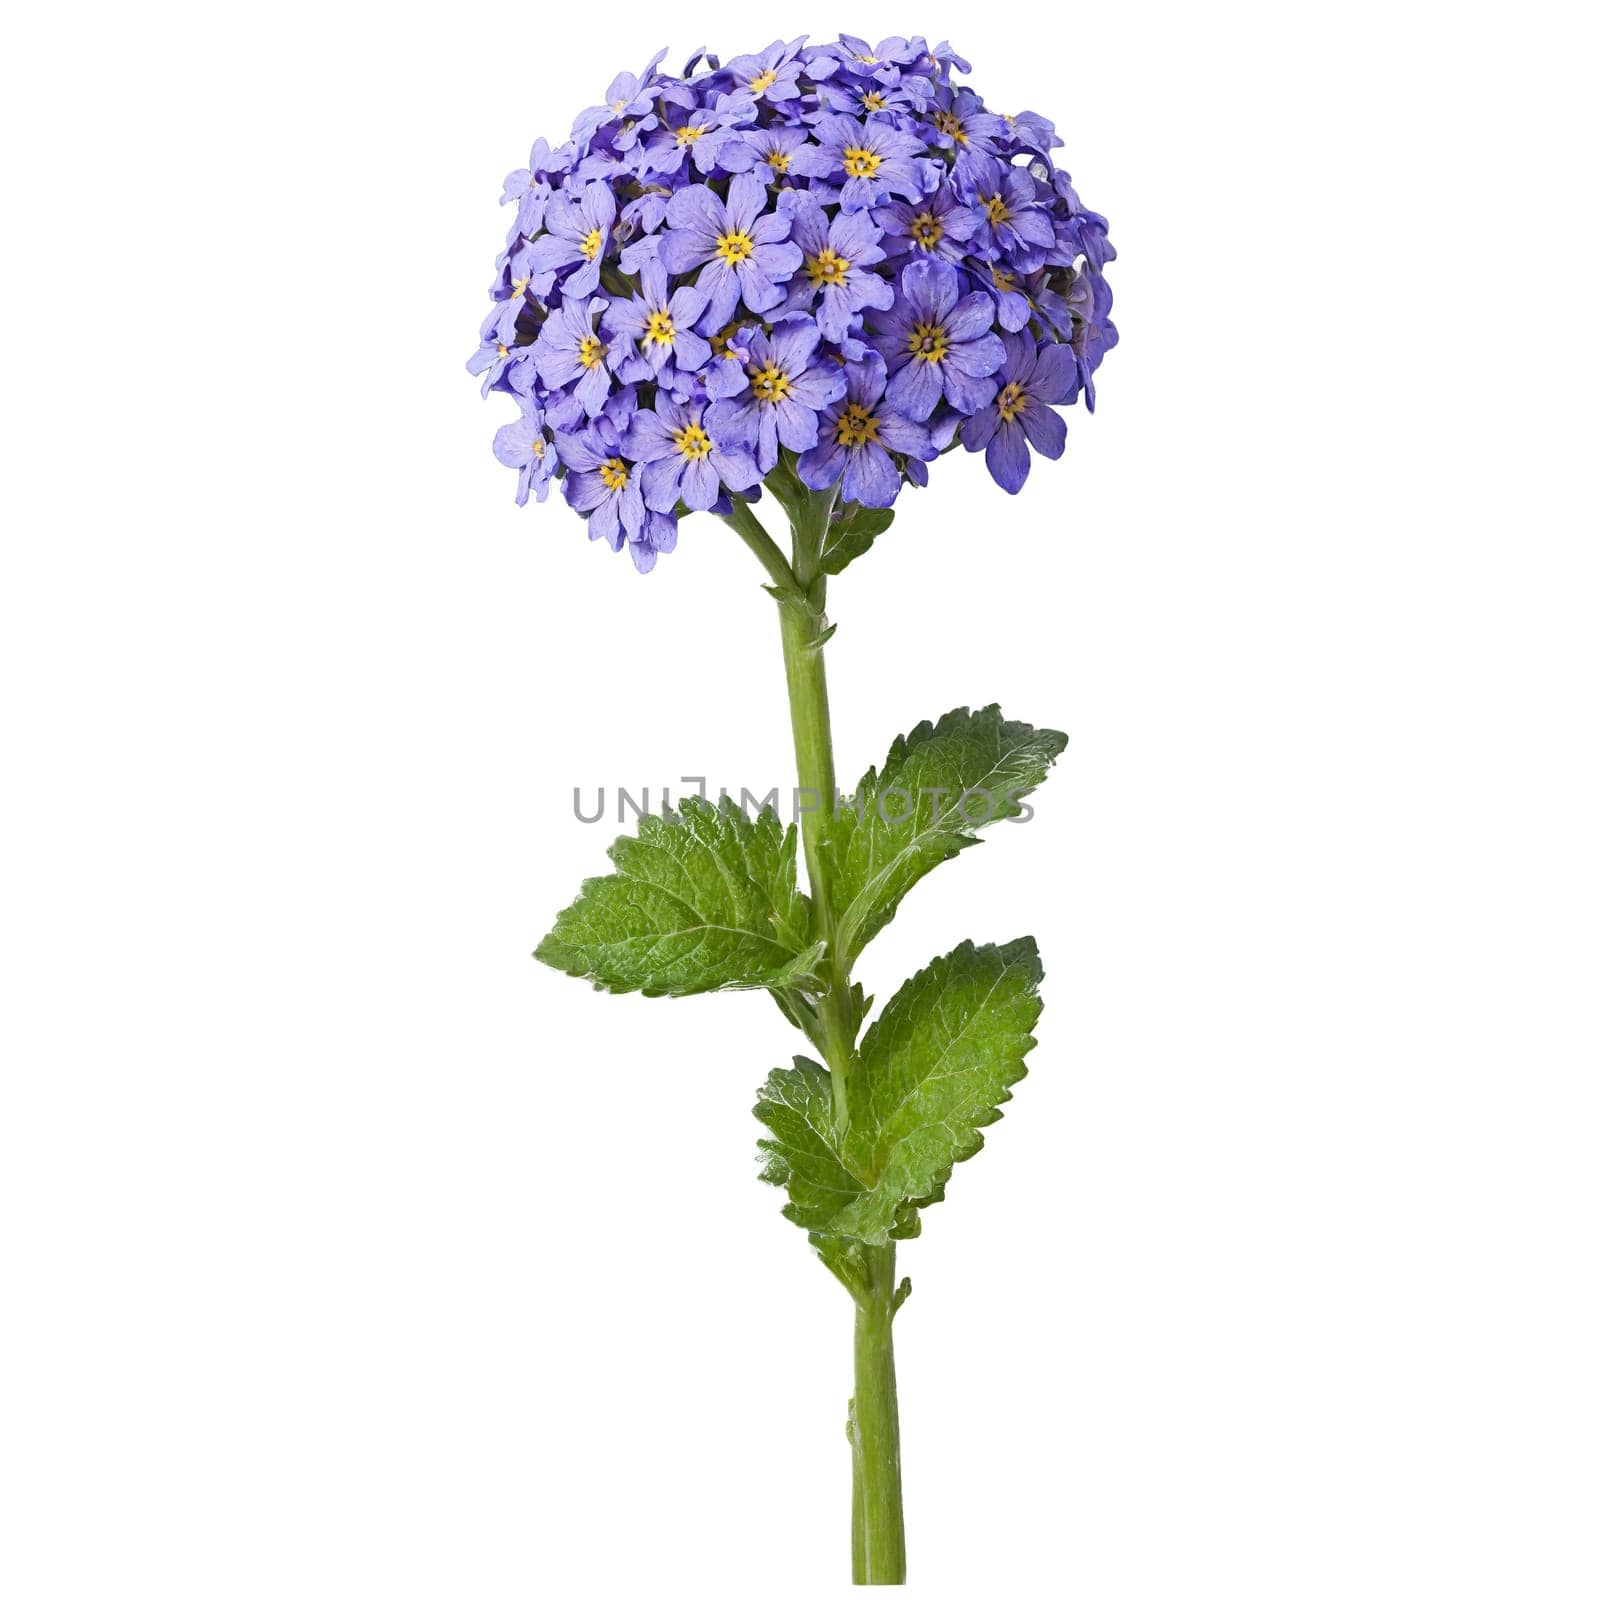 Heliotrope clusters of small purple flowers on sturdy stems in a blue glazed ceramic pot. Plants isolated on transparent background.